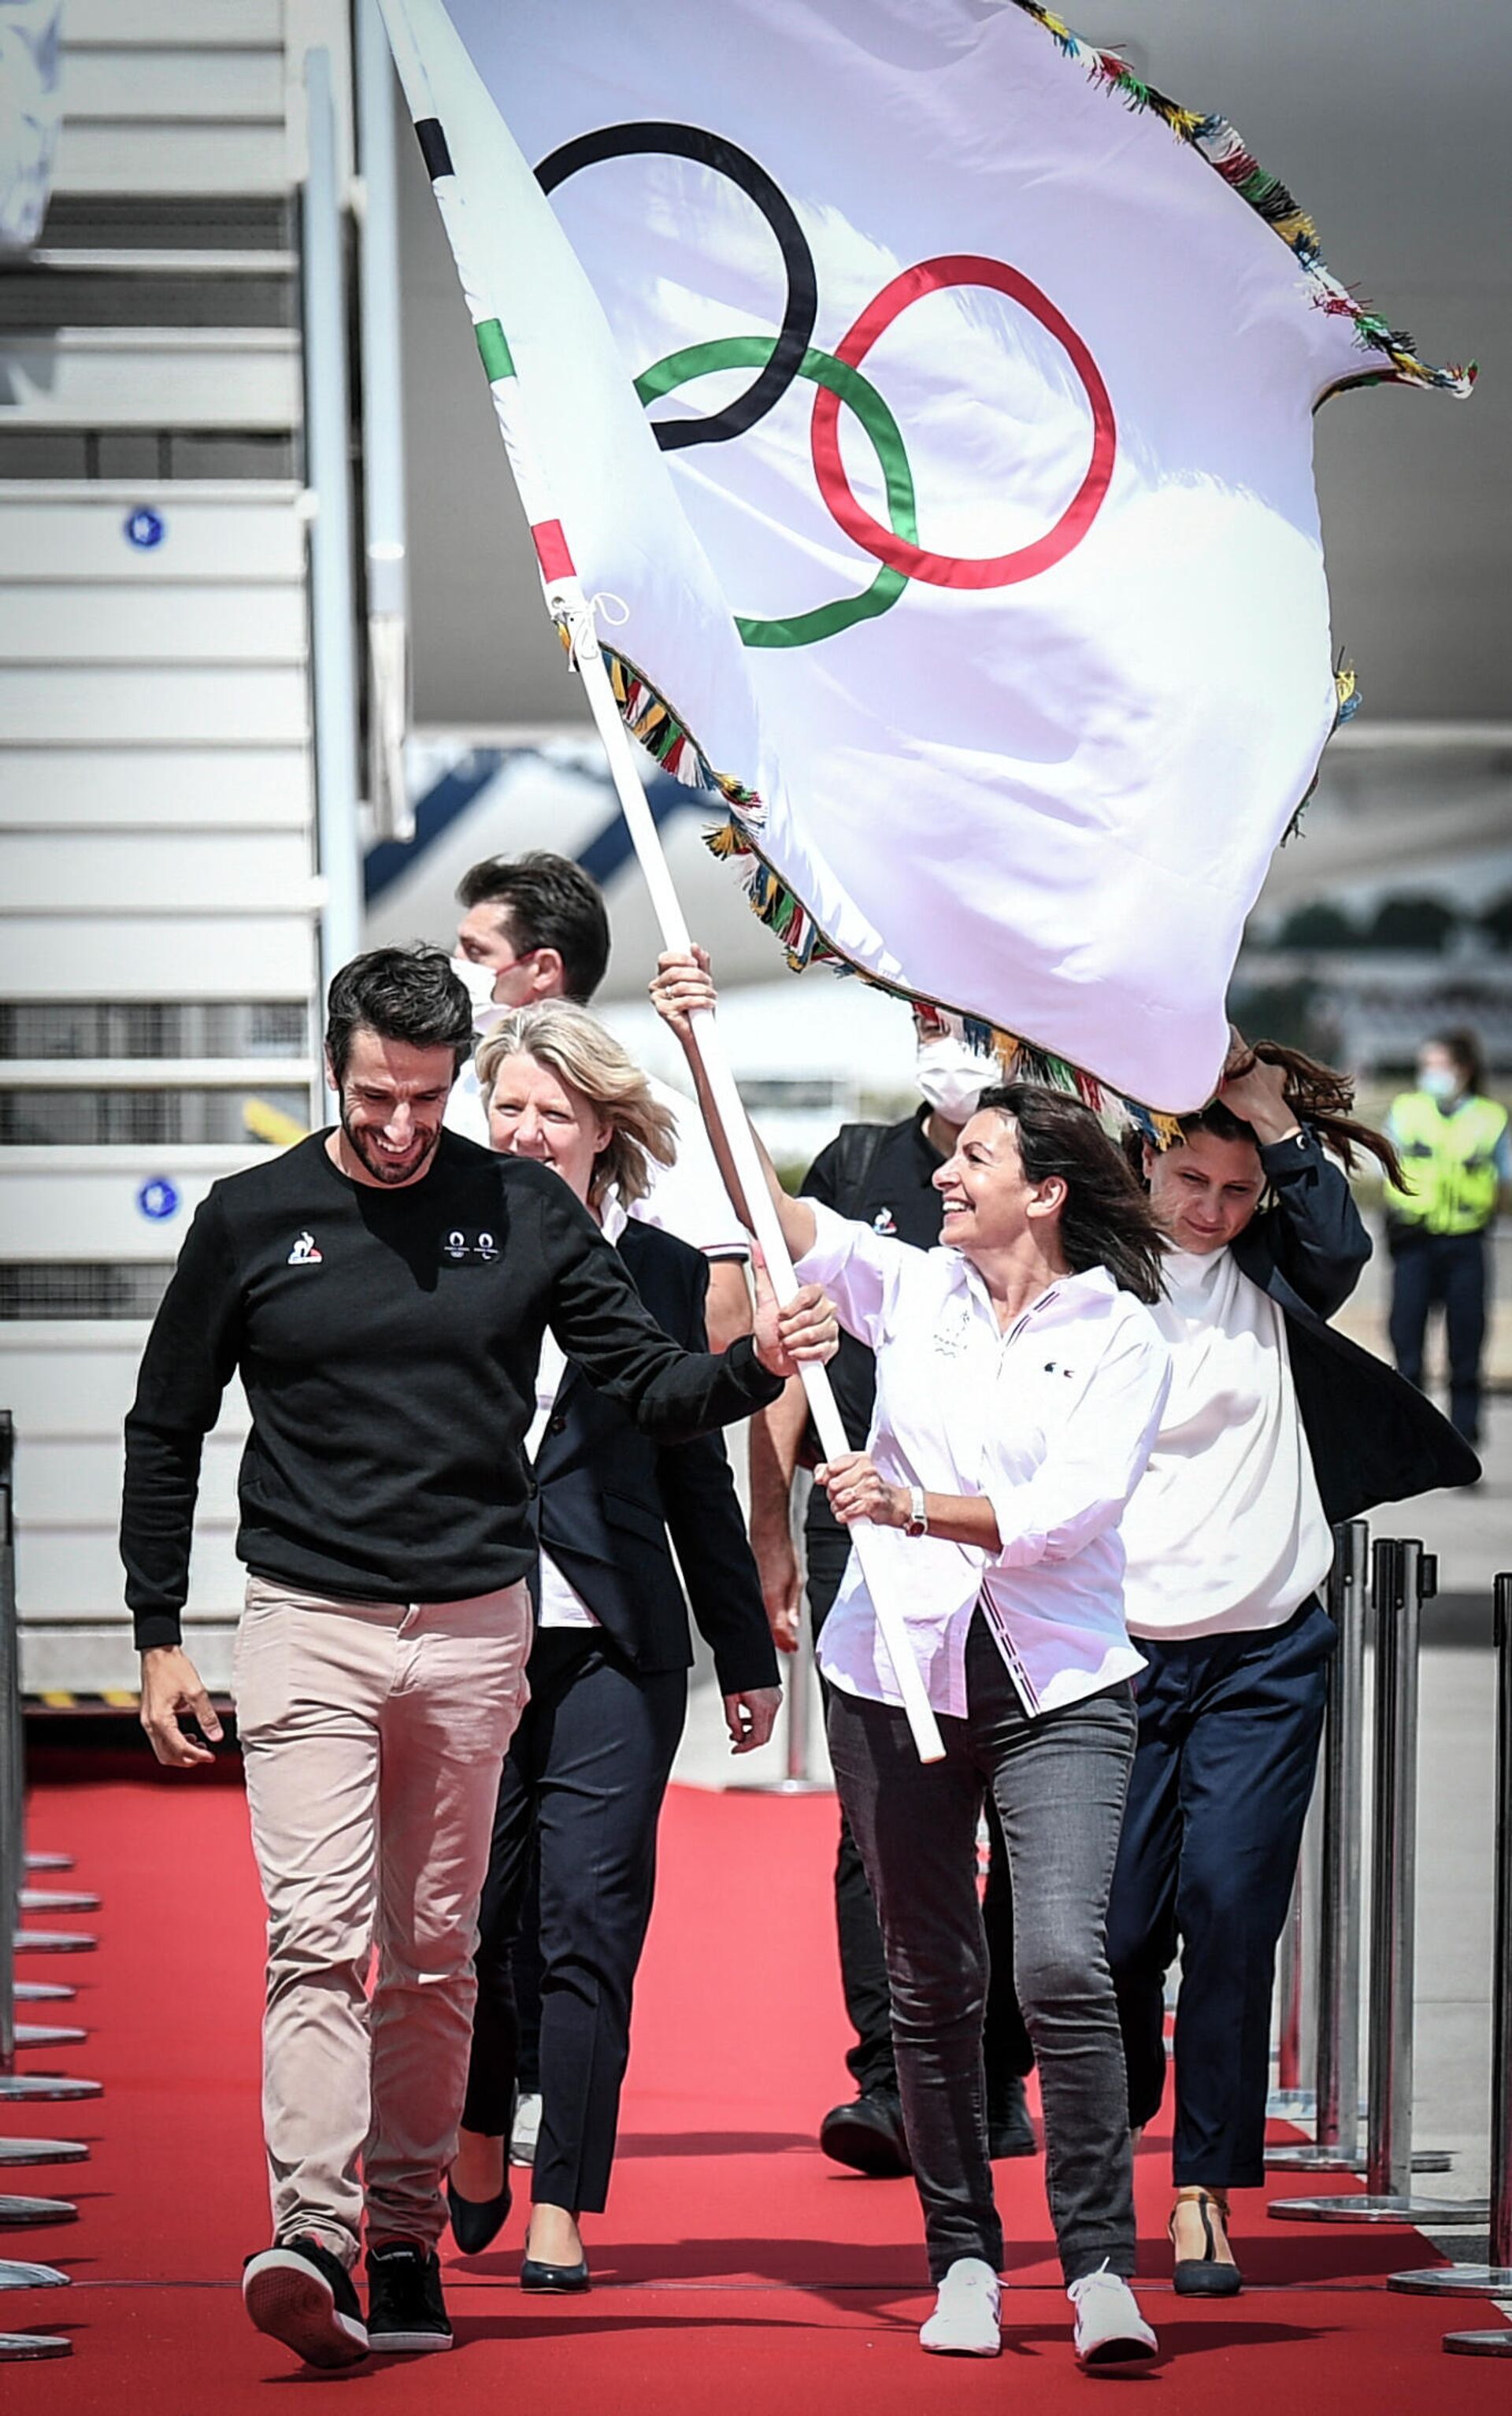 President of the Paris Organising Committee of the 2024 Olympic and Paralympic Games Tony Estanguet (front L) and Paris mayor Anne Hidalgo (front R) carry the Olympic flag from the plane, marking the handover from Japan to the next Games in Paris 2024, as French athletes return from the Tokyo Olympic 2020 games at Roissy-Charles de Gaulle airport, north of Paris on August 9, 2021. - Sputnik International, 1920, 12.09.2021